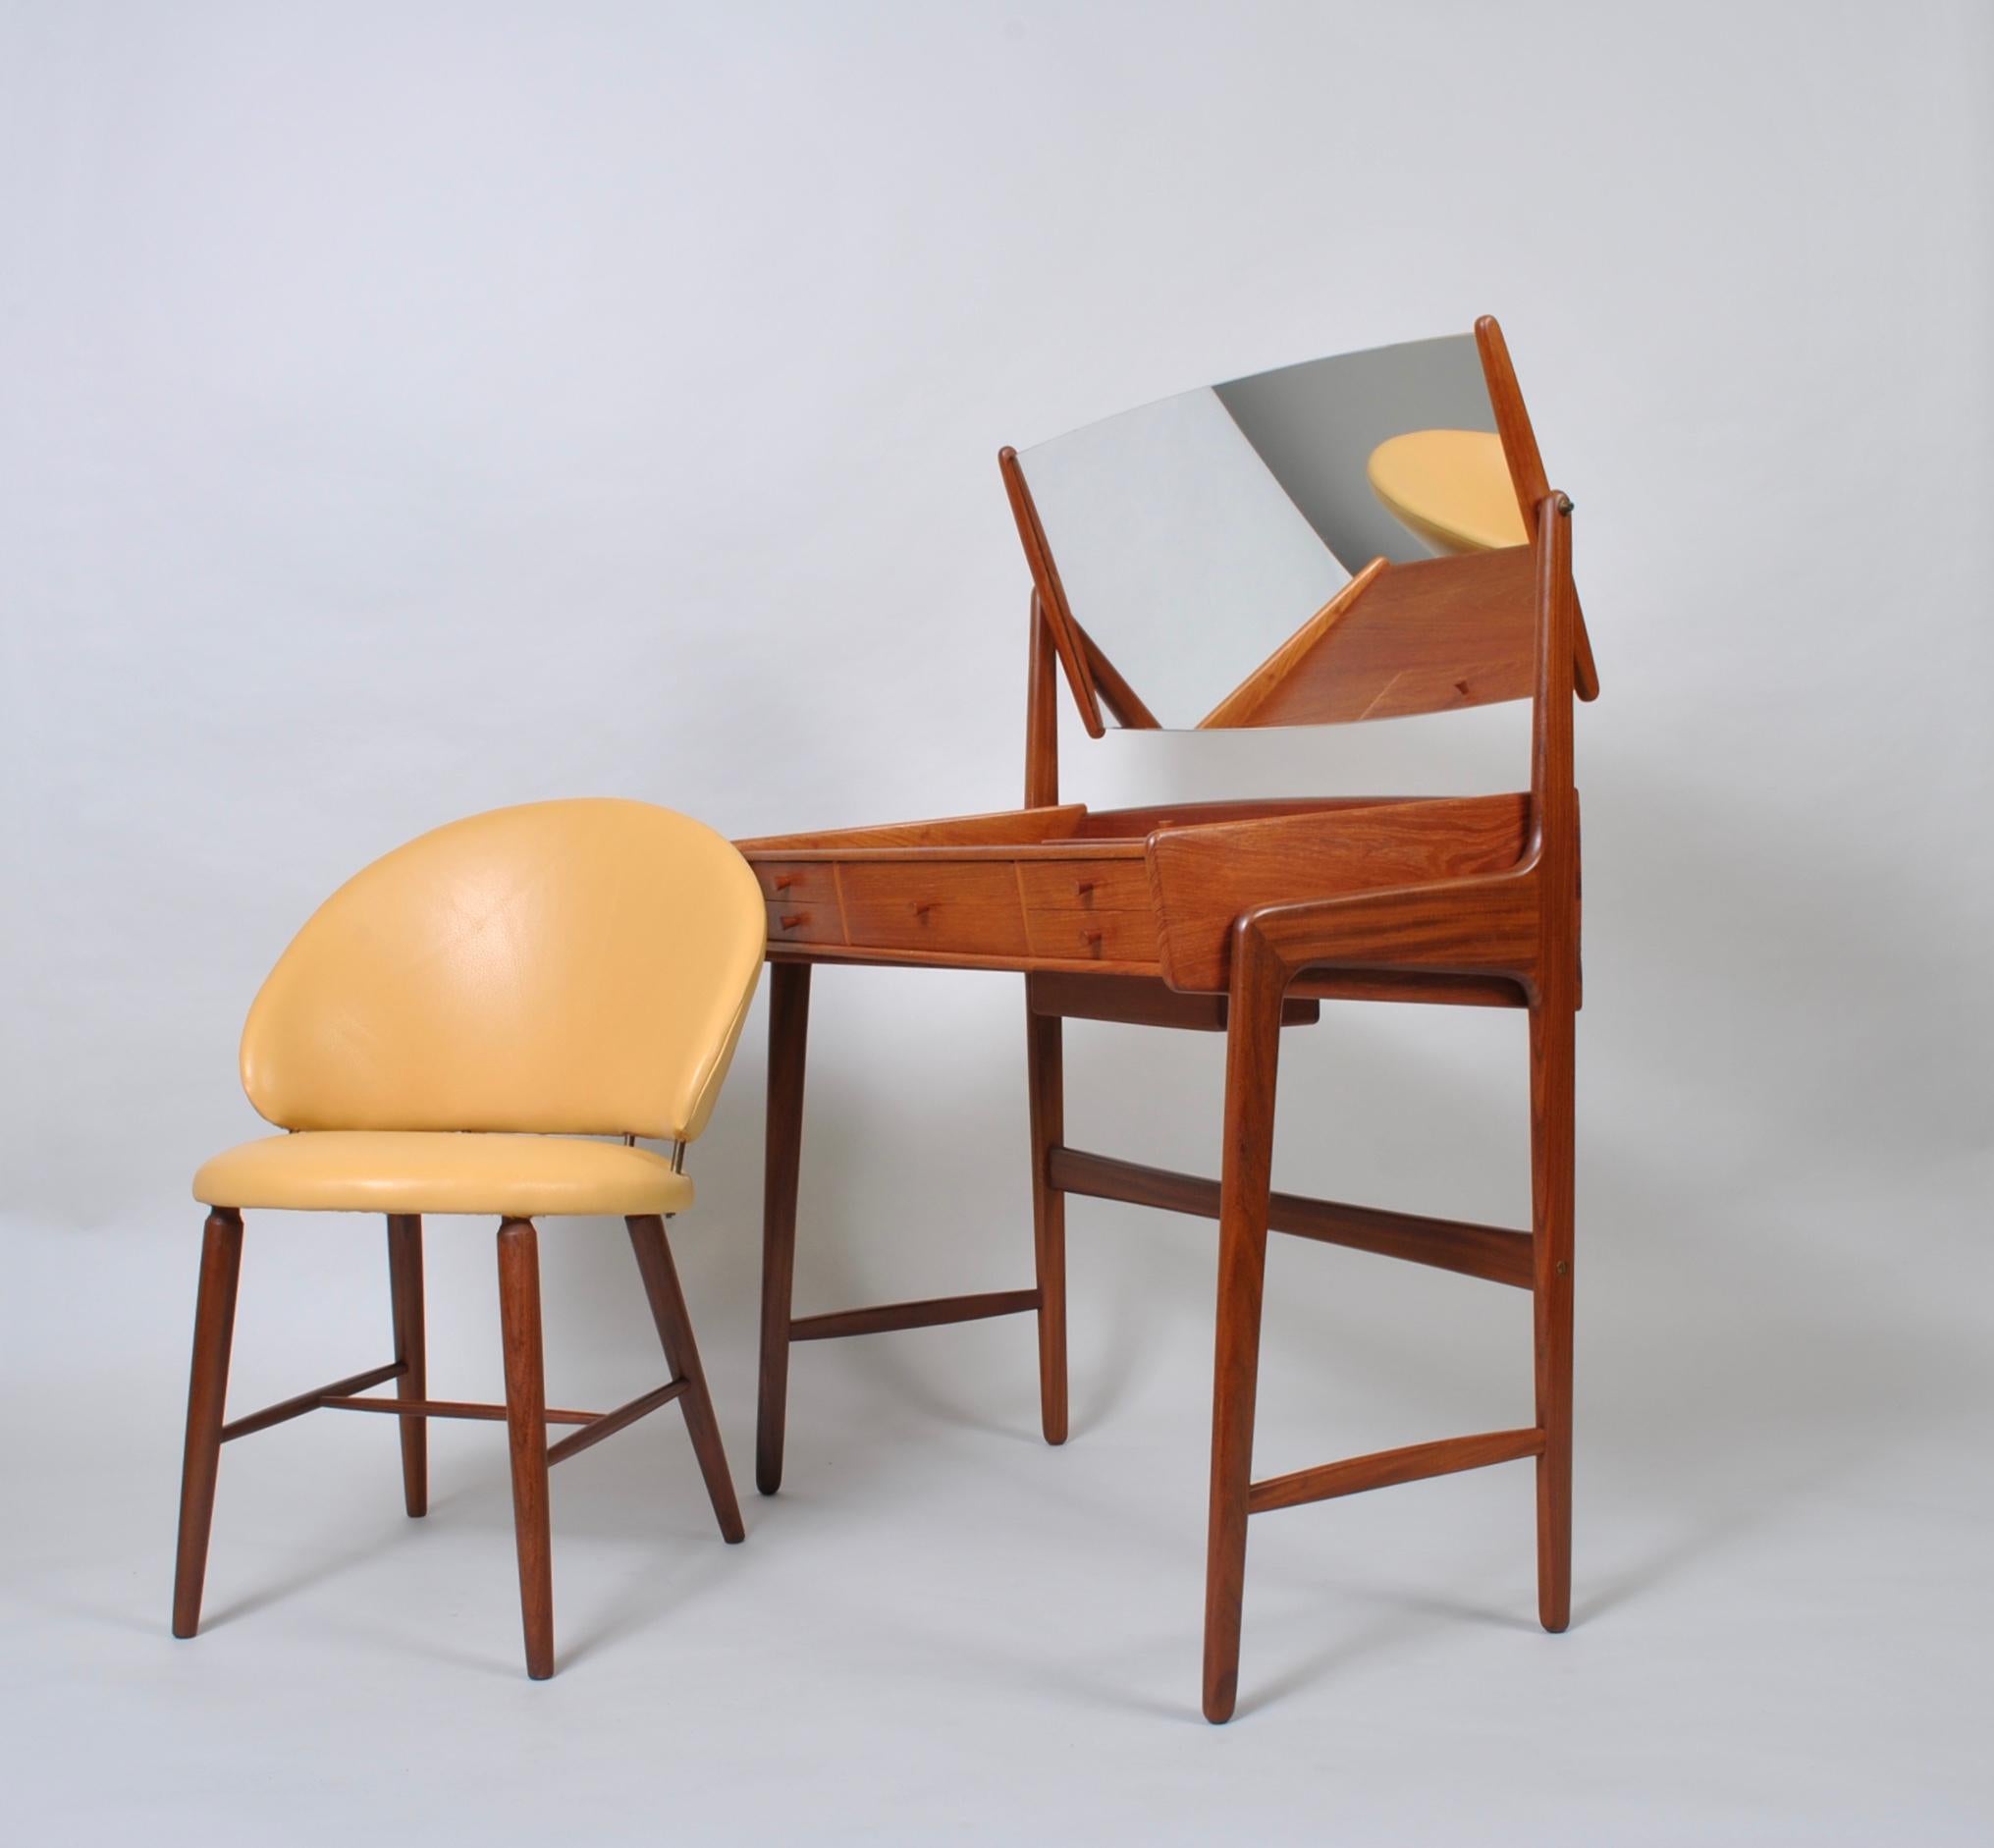 20th Century Danish Vanity Table and Chair, Svend Aage Madsen